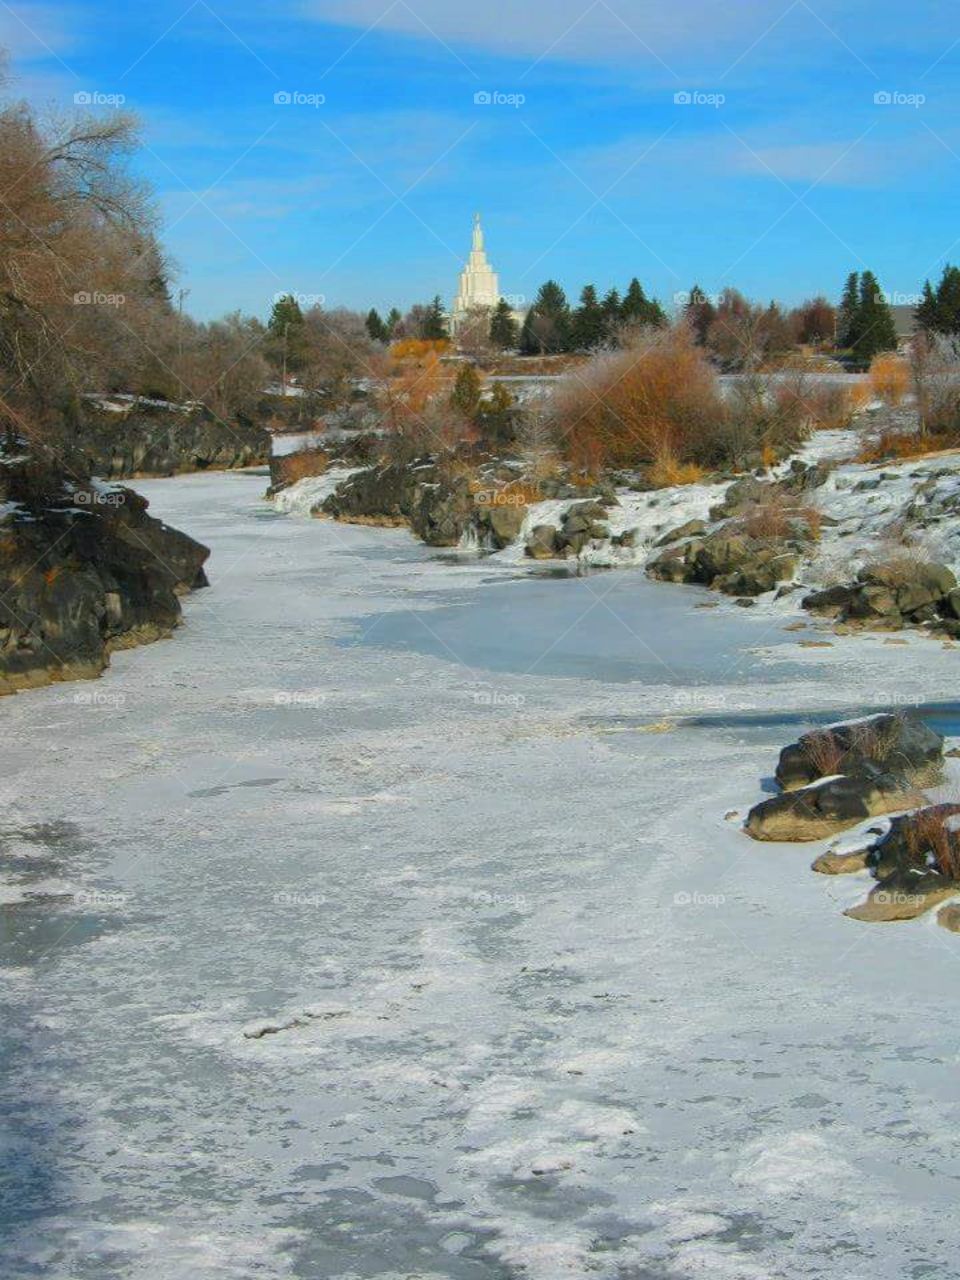 The Idaho Falls with the LDS Idaho Falls Temple in the background